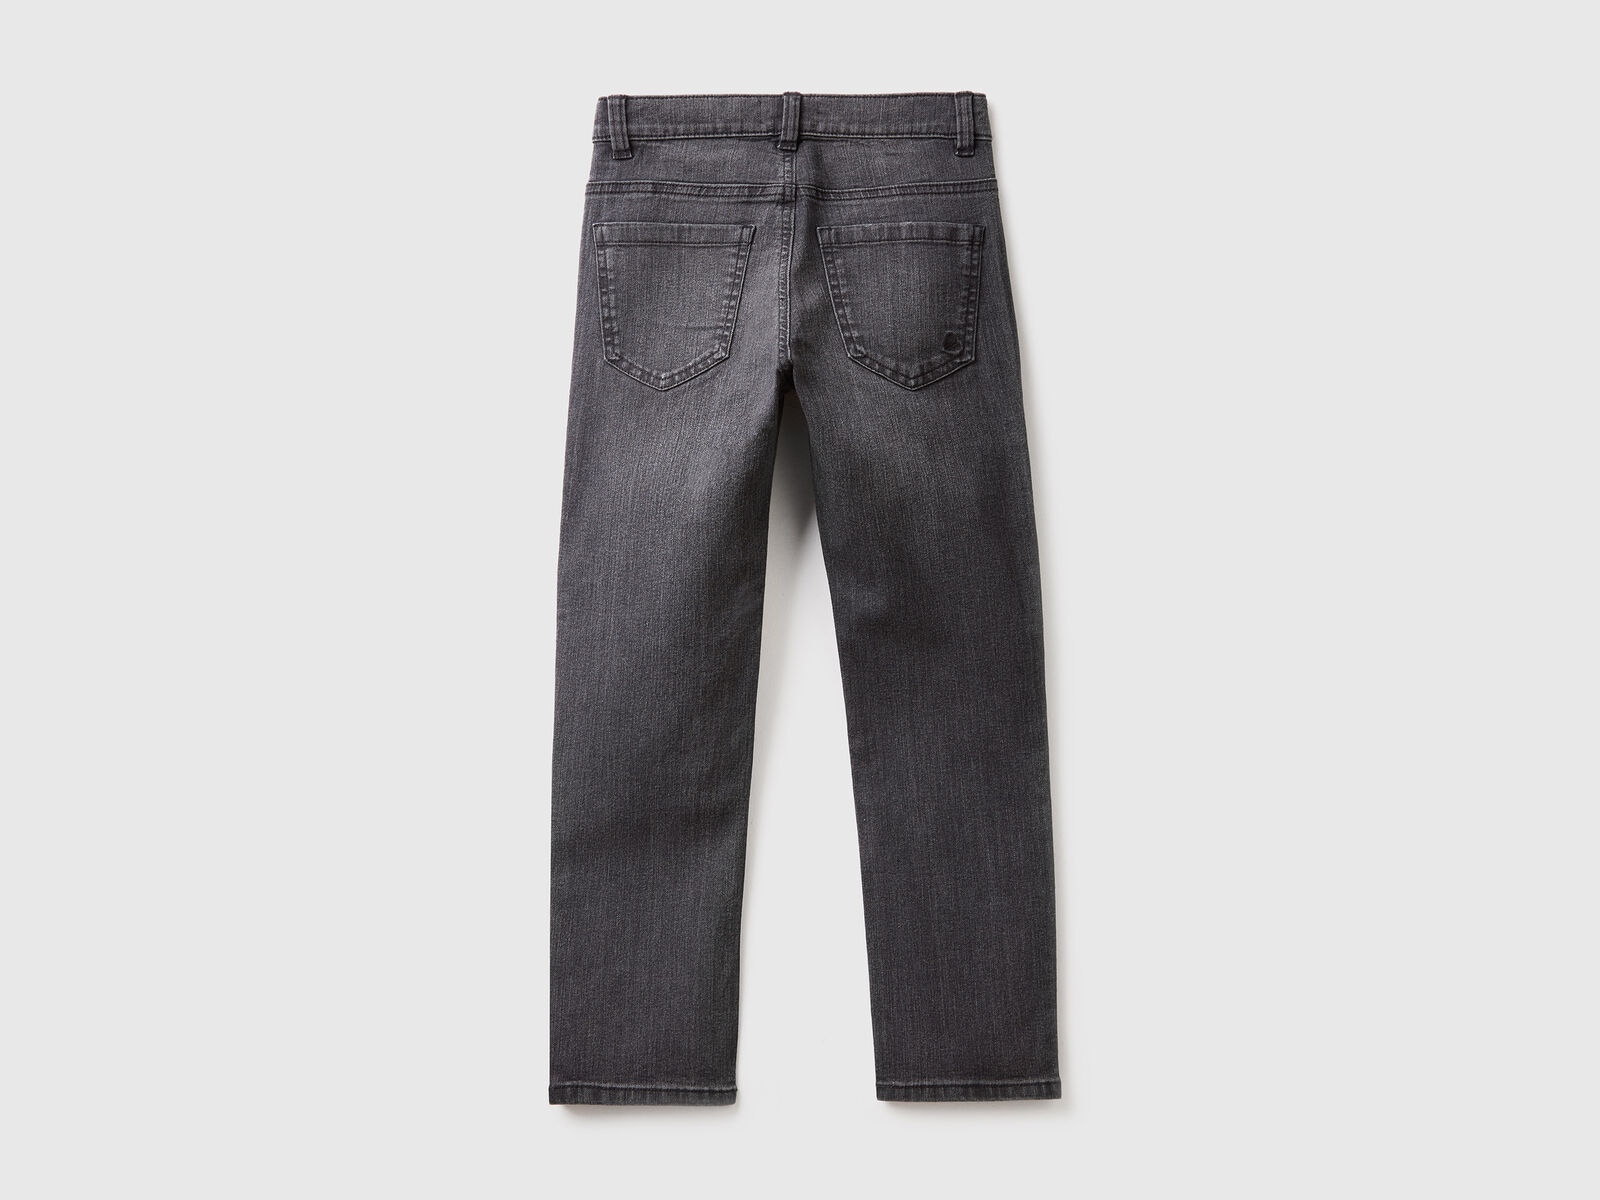 Recycled Cotton Denim Jeans - 3 colors